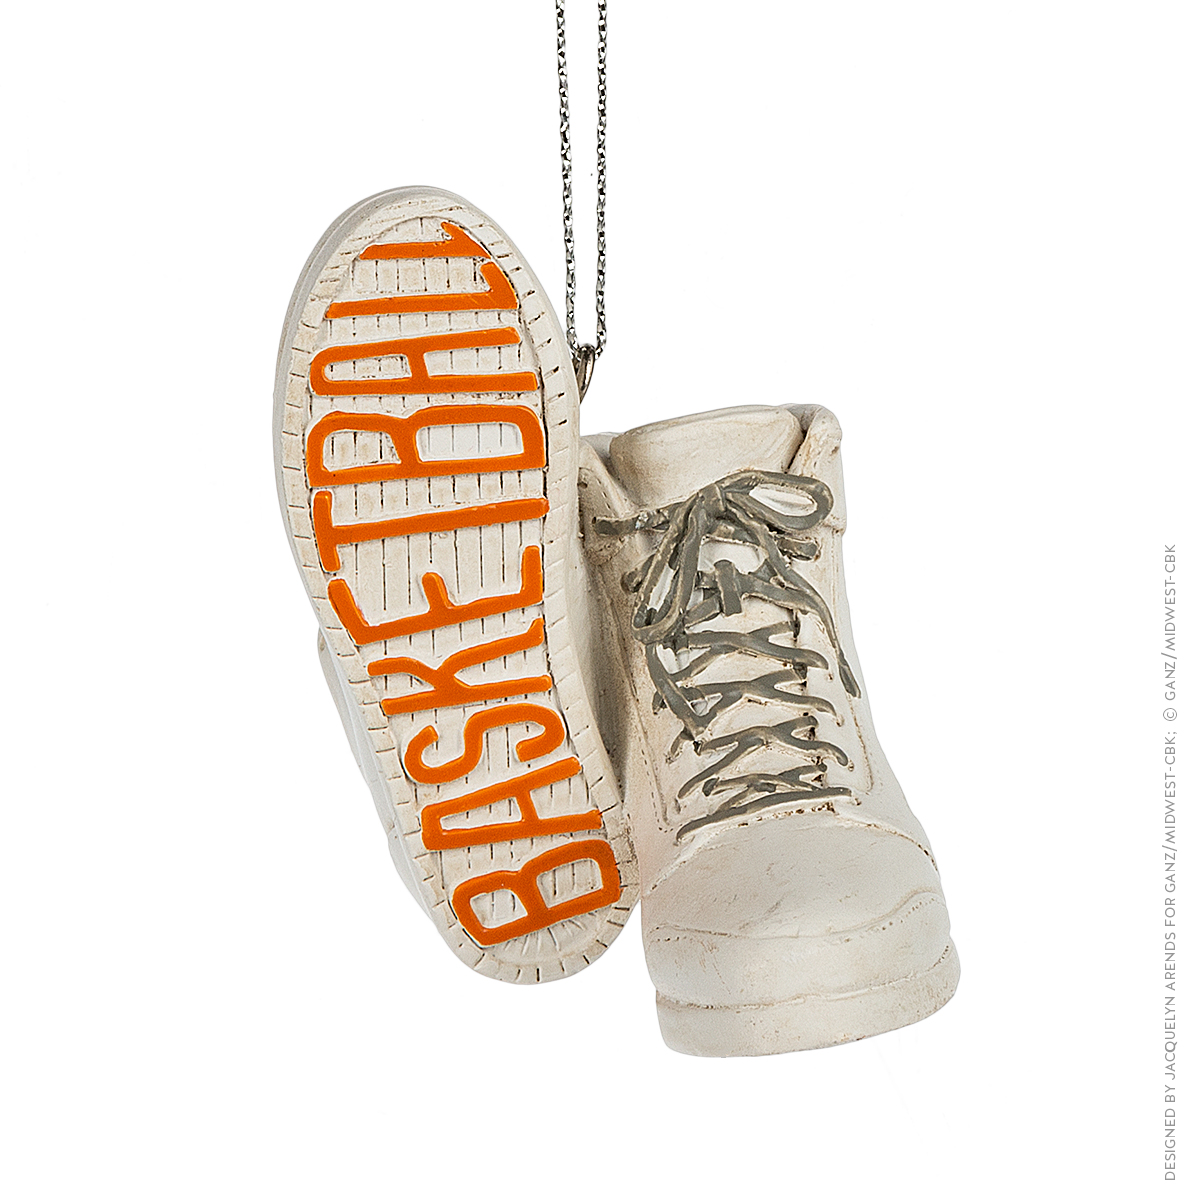 Specialty Ornaments Basketball Shoes ornament by Jacquelyn Arends; © Ganz/Midwest-CBK 2019